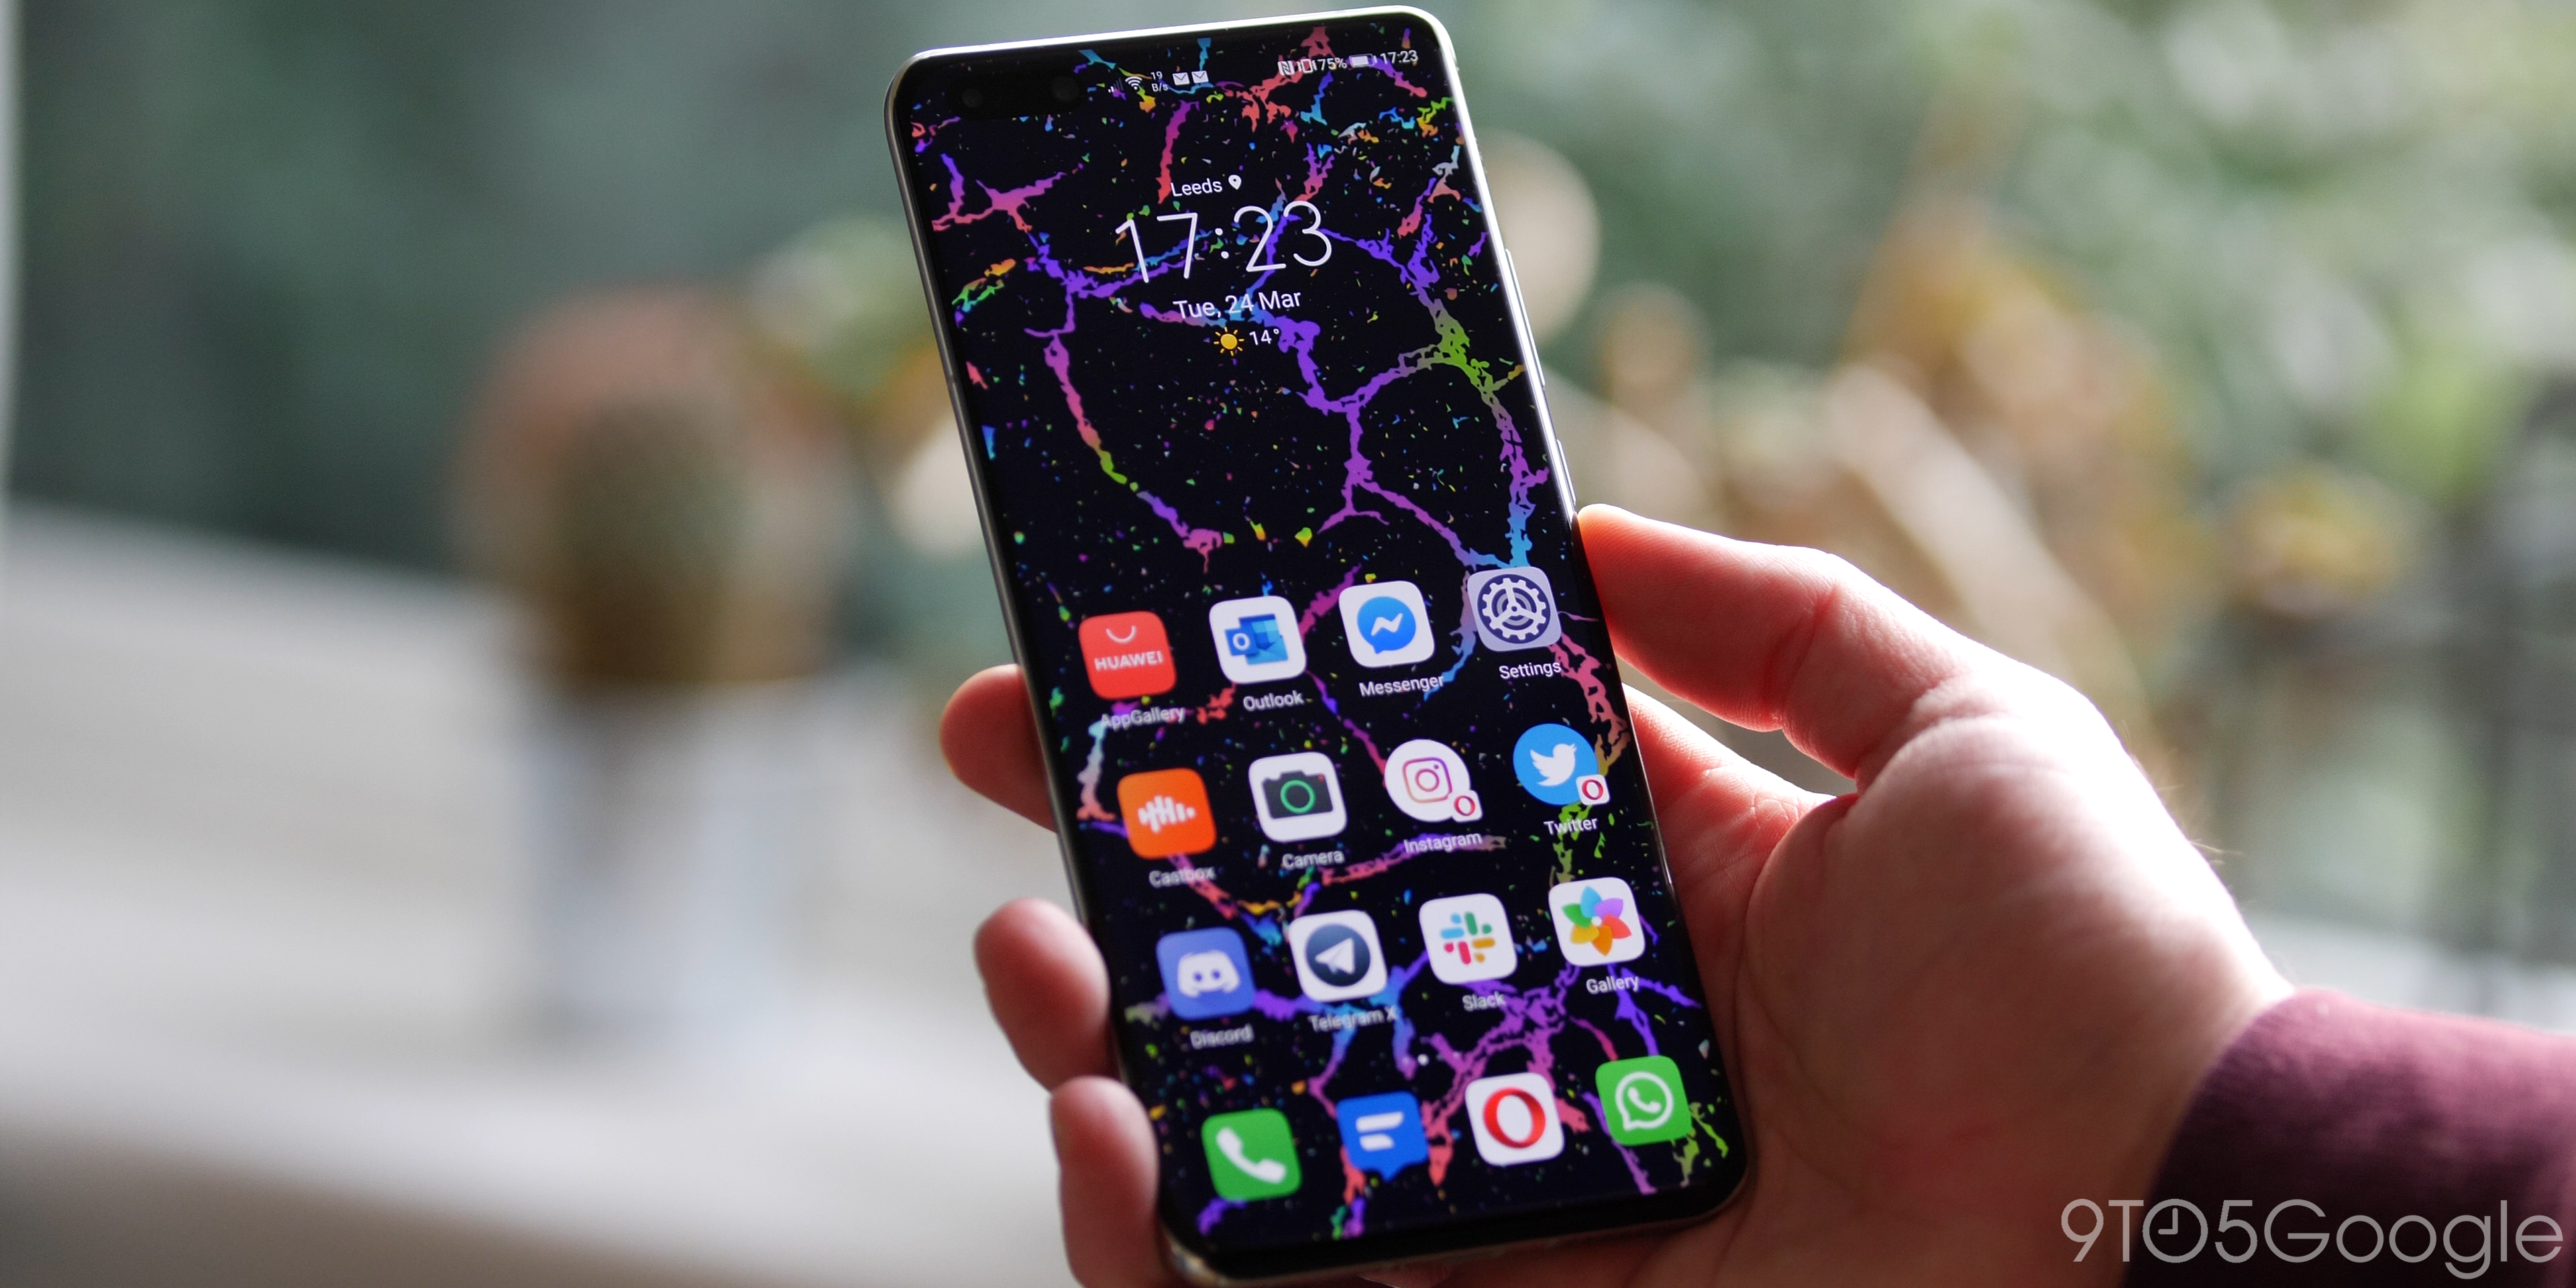 Huawei P40 Pro Review: My Favorite Hardware In Mobile Right Now